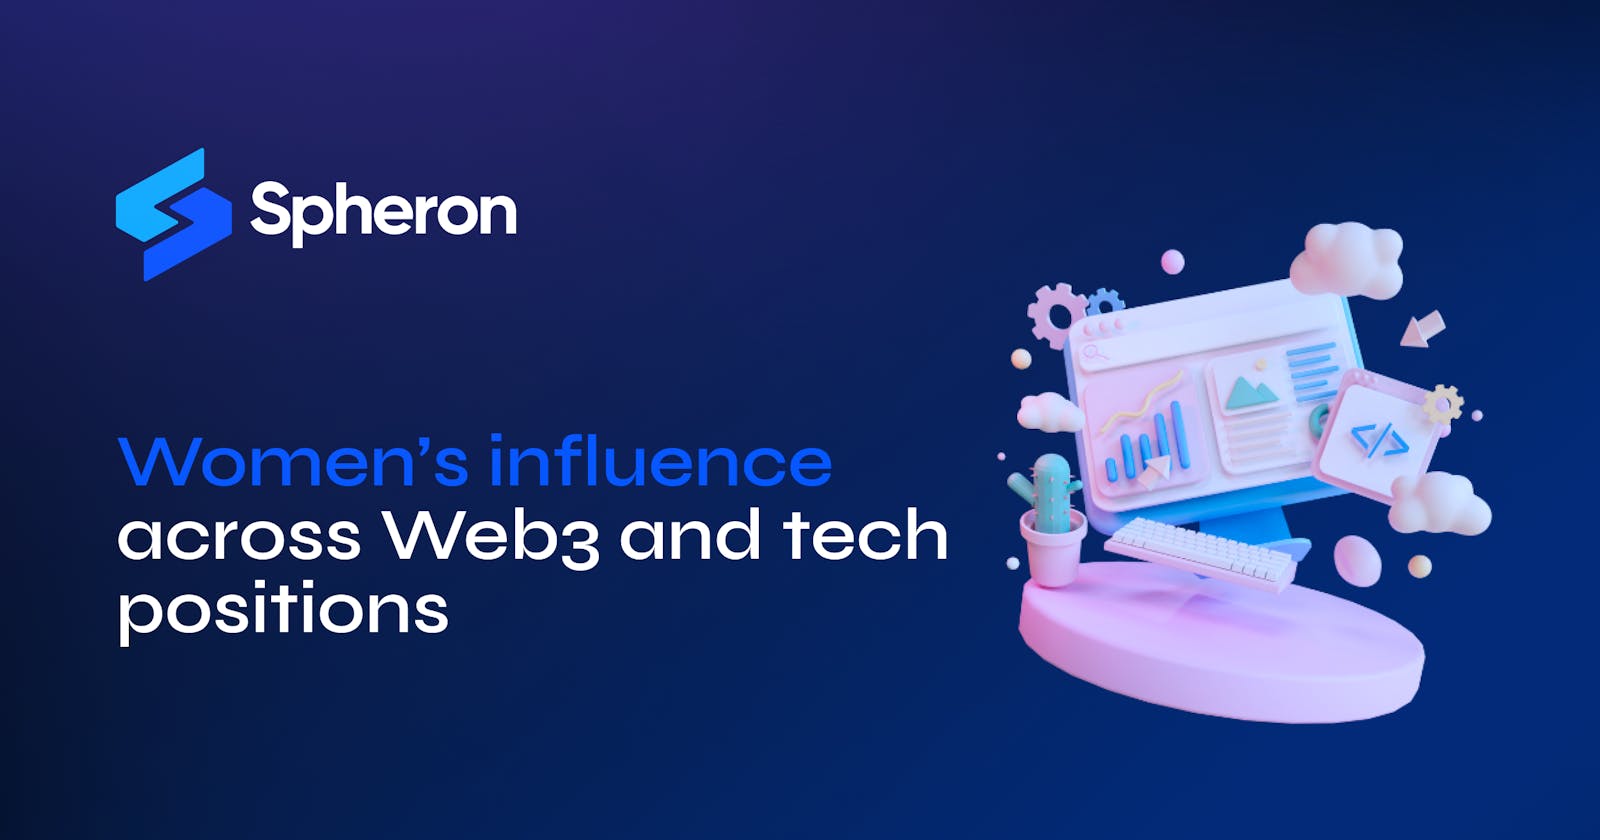 Women’s influence across Web3 and tech positions